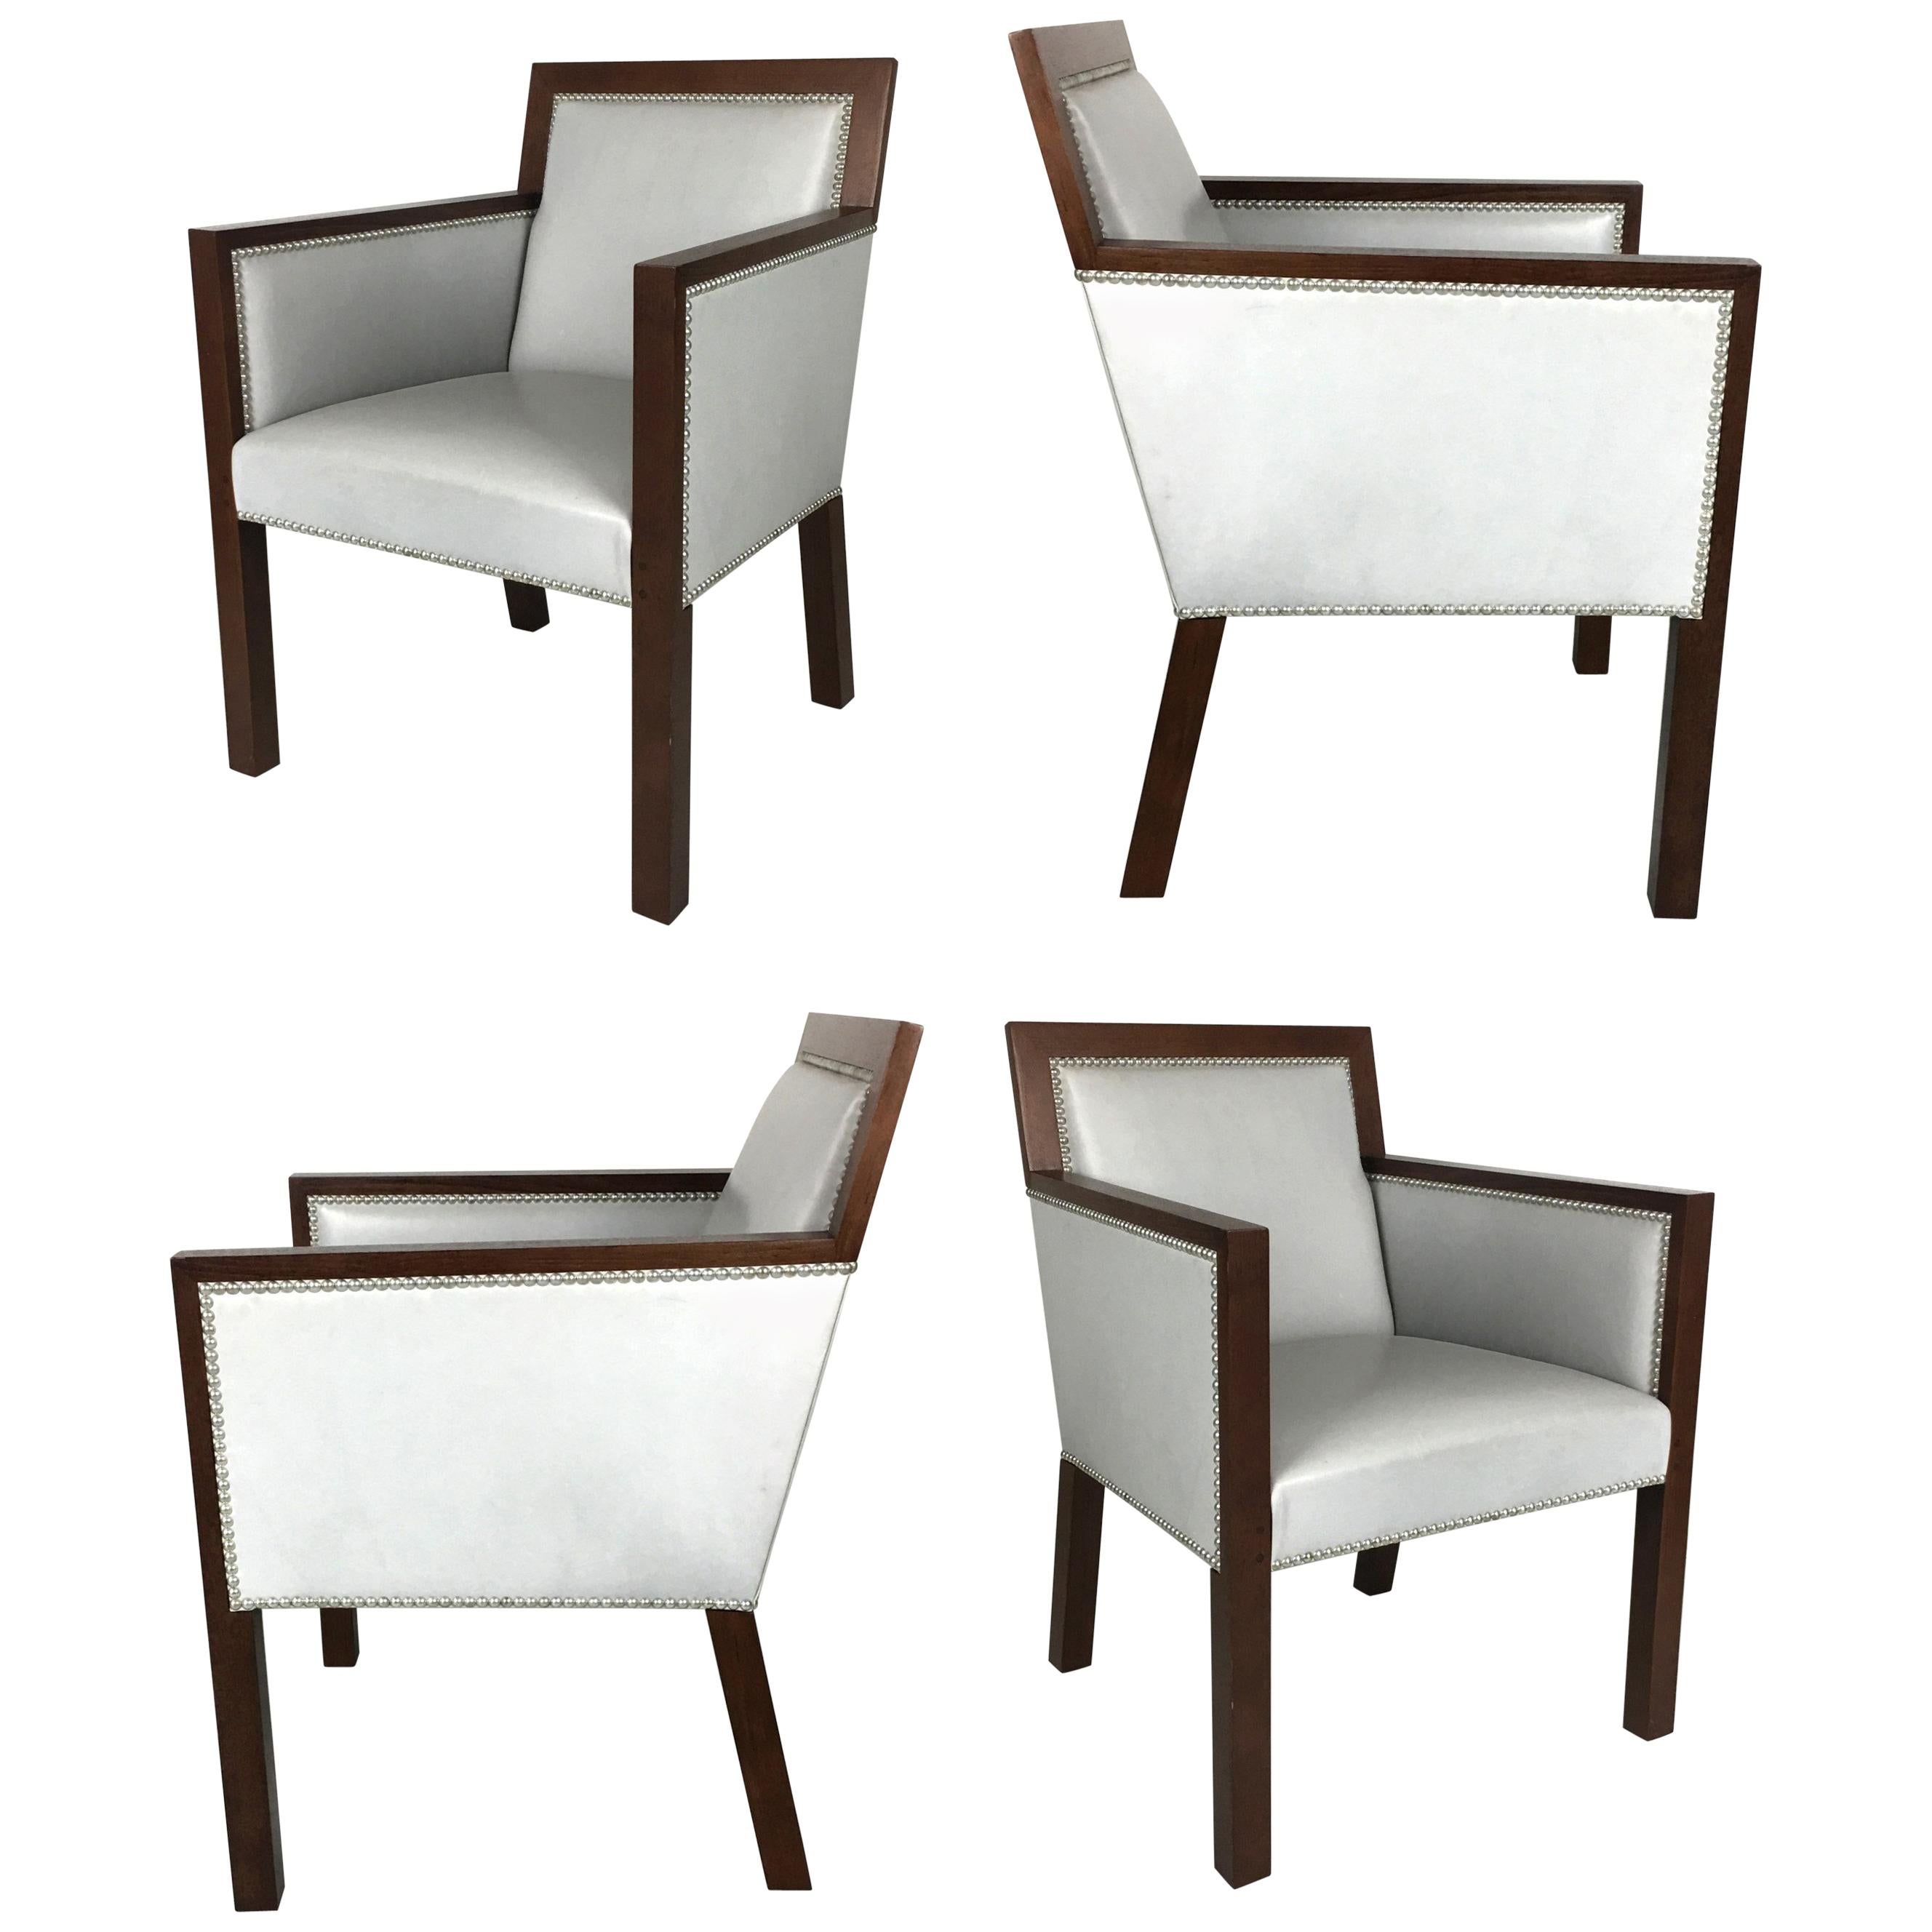 Luxurious Set of Four Leather Armchairs by John Hutton for Sutherland